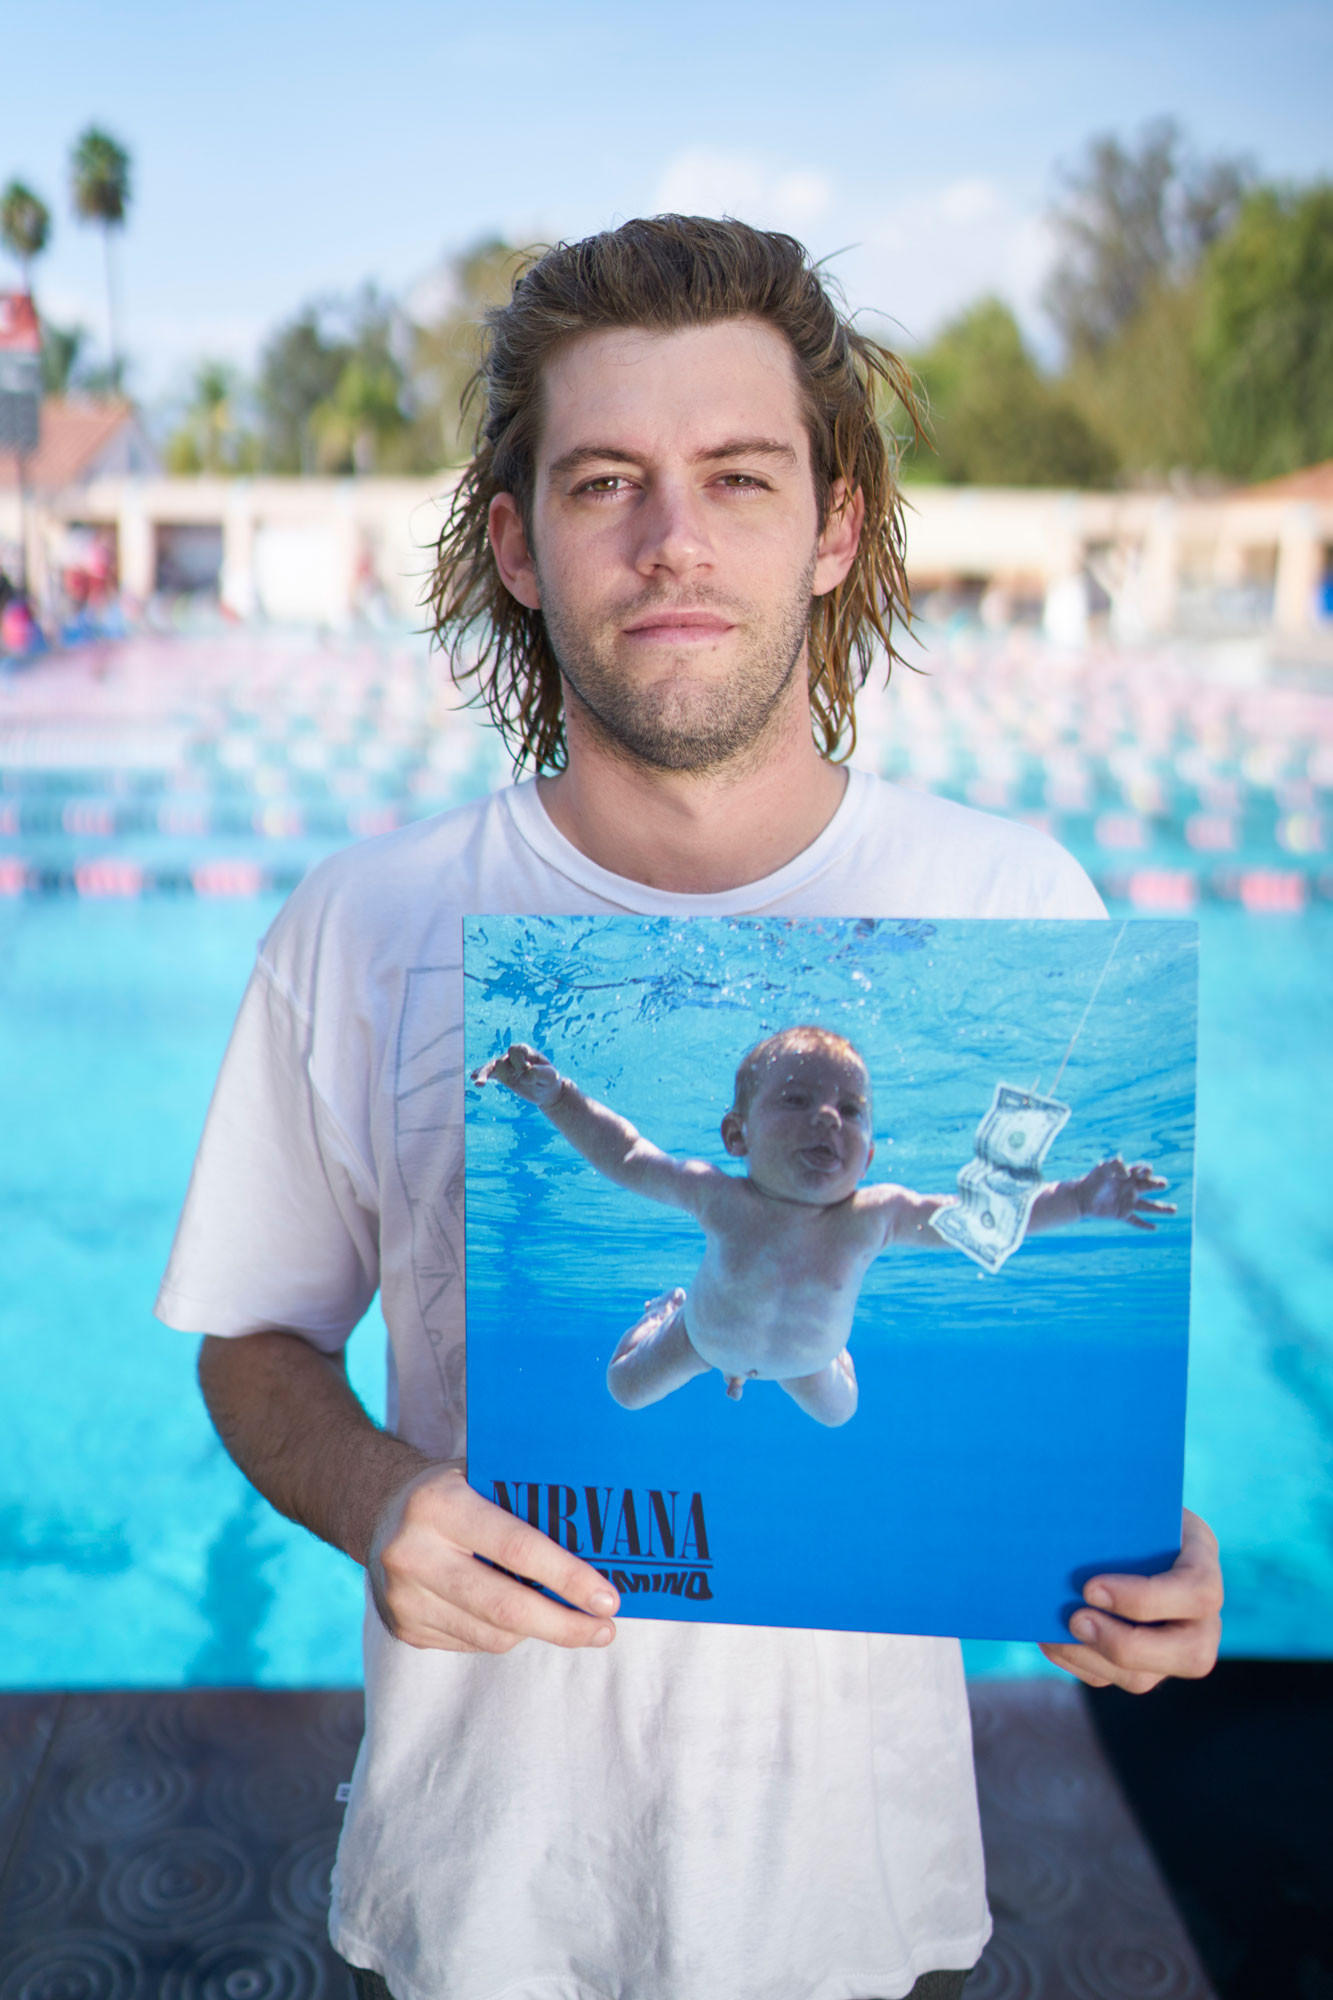 Nirvana's "Nevermind" album cover baby sues band and Kurt Cobain's estate for alleged "sexual exploitation"